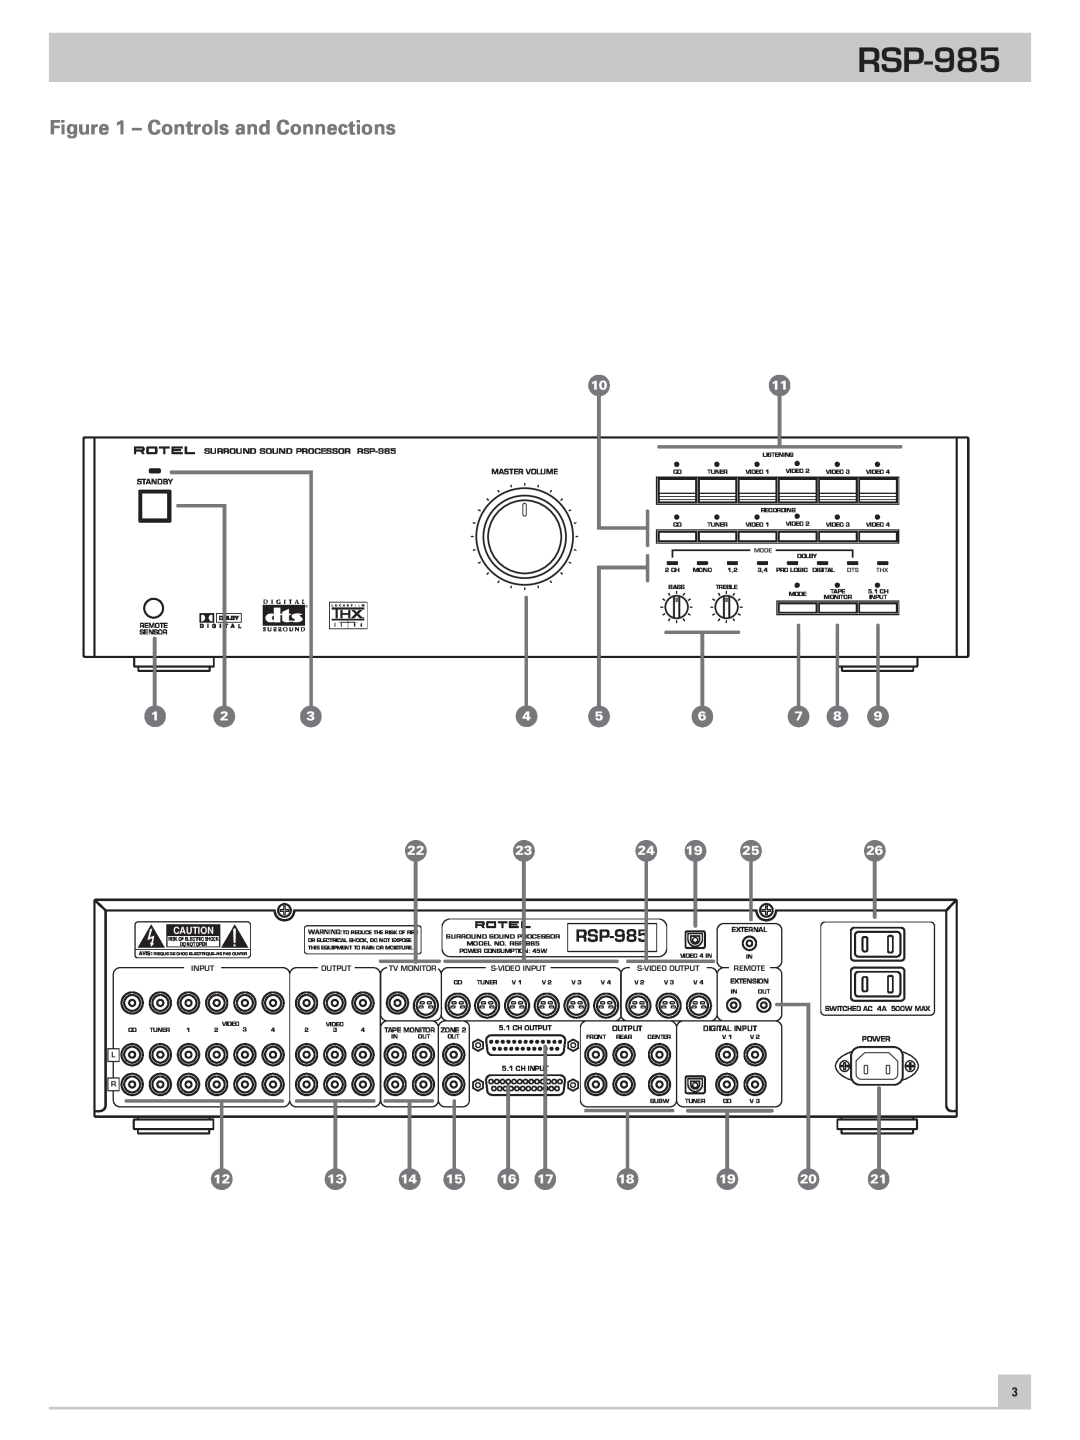 Rotel RSP-985 owner manual Controls and Connections, 1011 